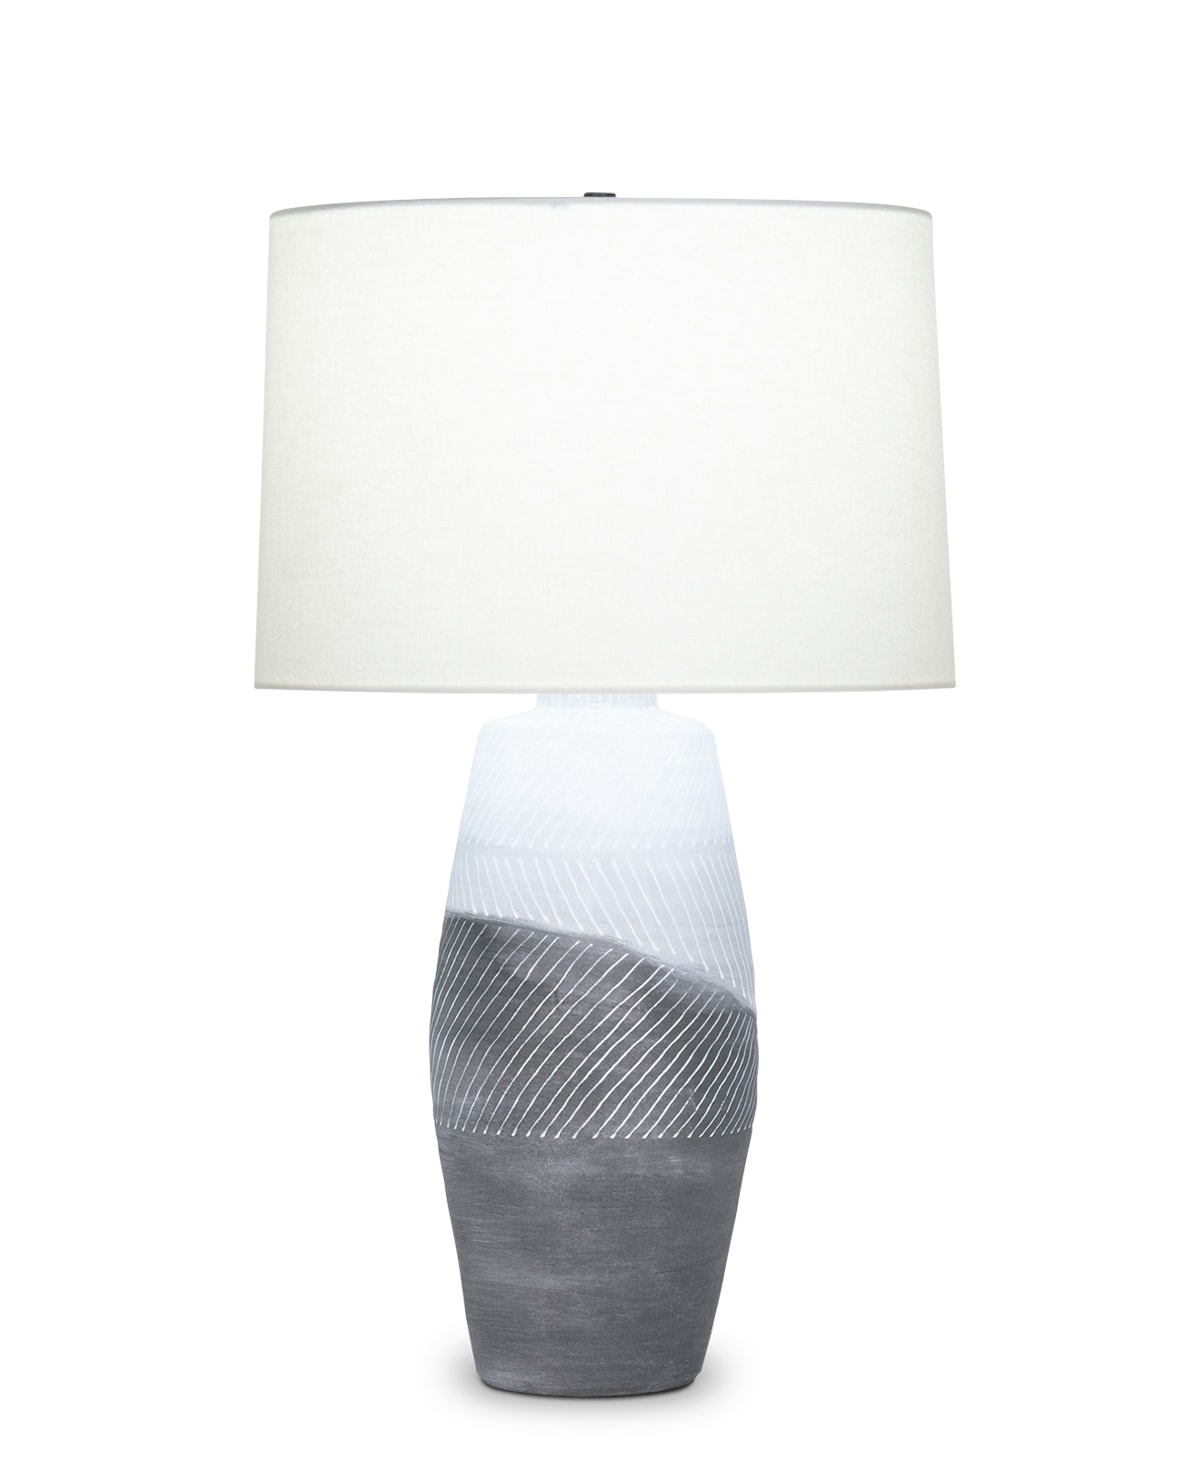 FlowDecor Aaron Table Lamp in ceramic with varying shades of grey and off-white linen tapered drum shade (# 4498)